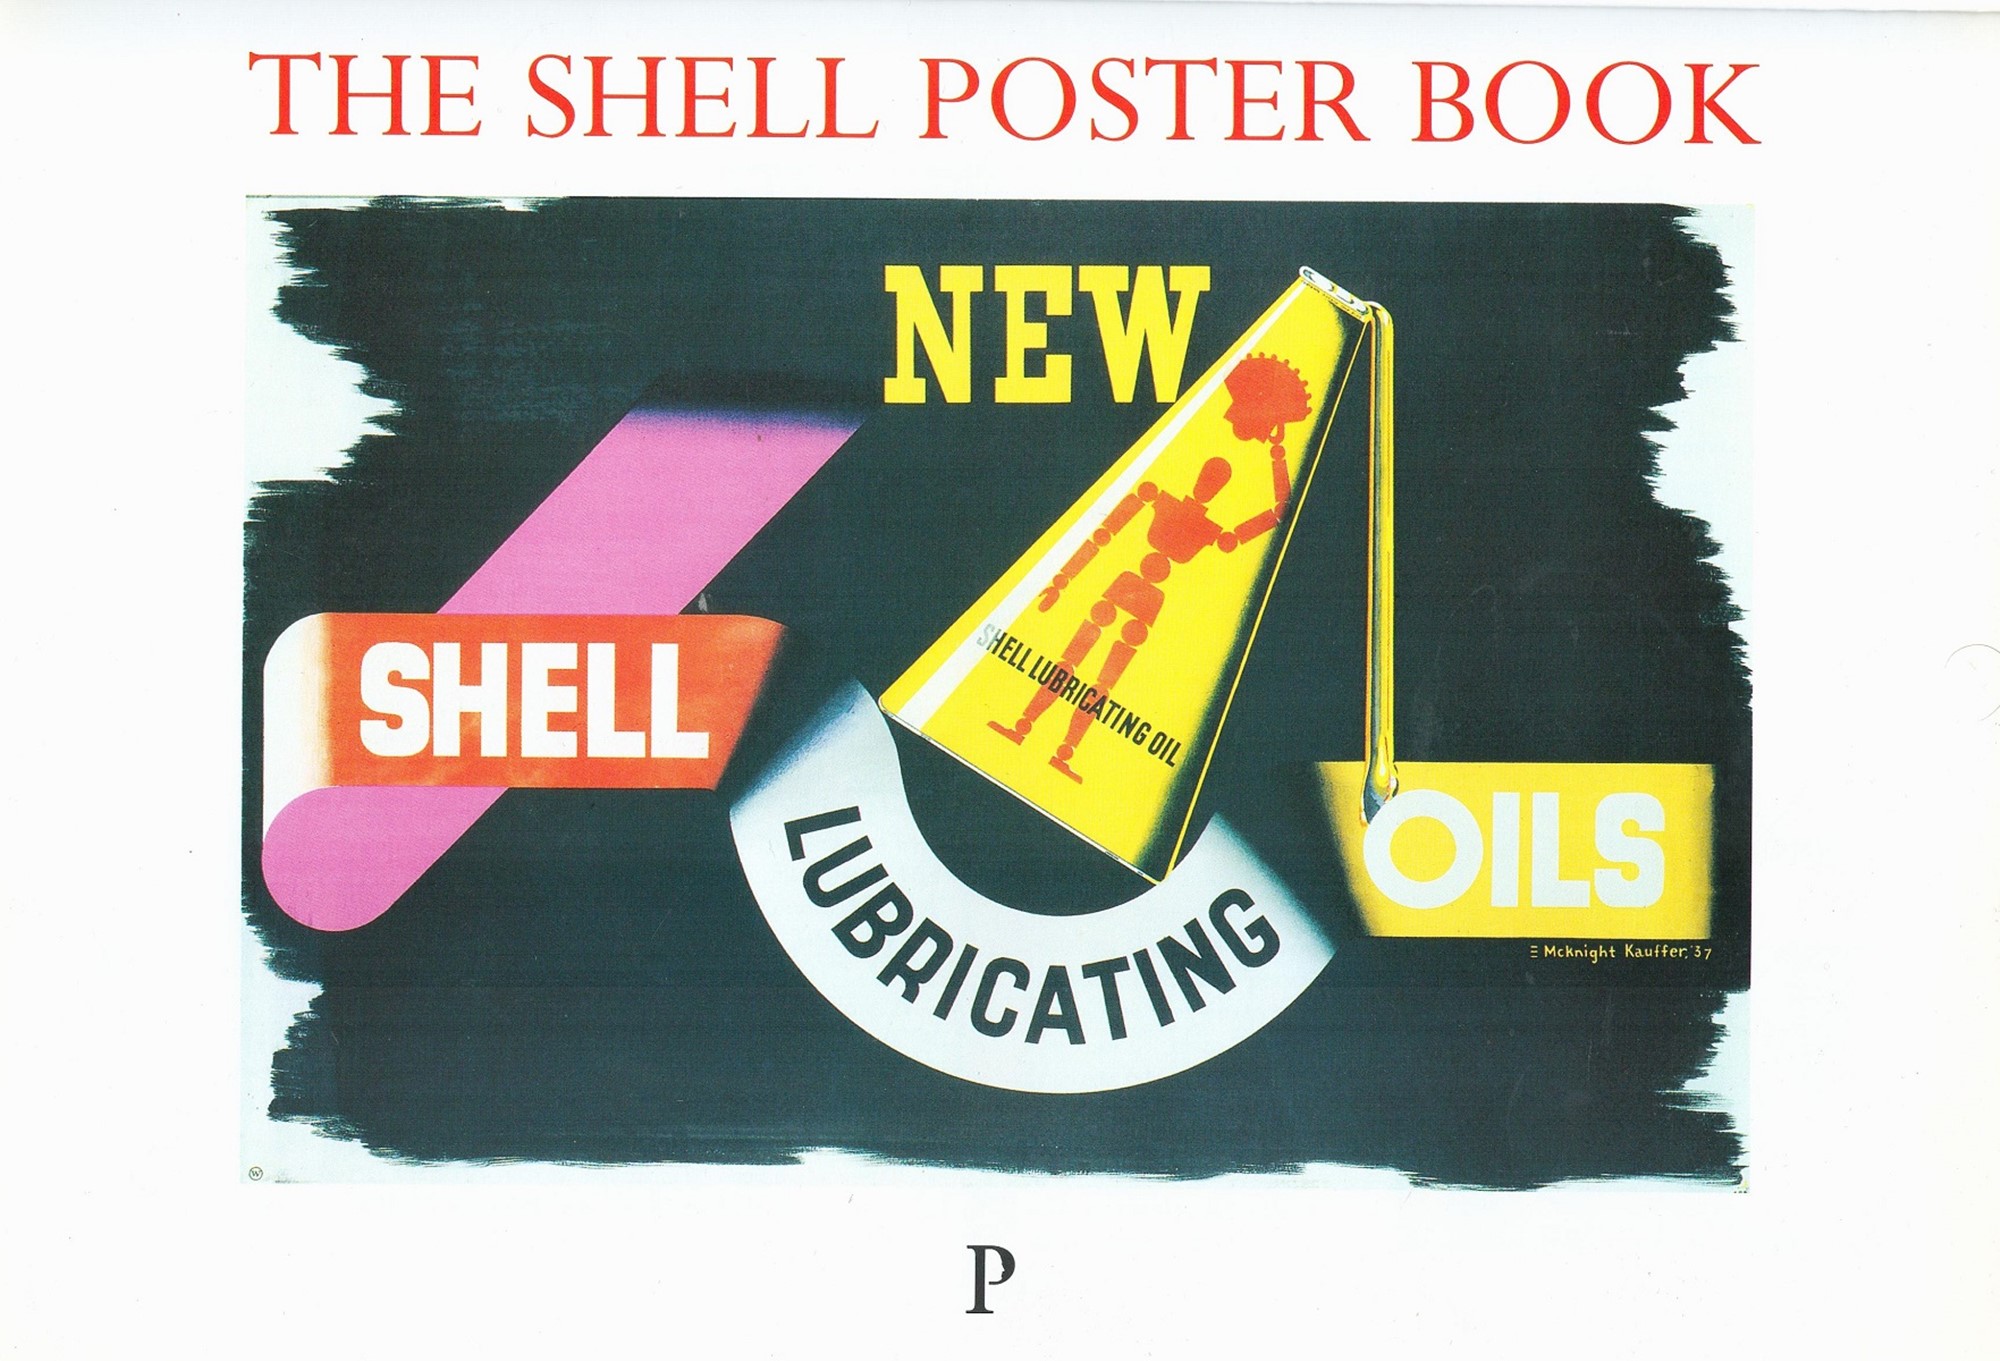 The Shell Poster Book Oil and Petrol Softback Book 1998 First Edition published by Profile Books Ltd - Image 3 of 6